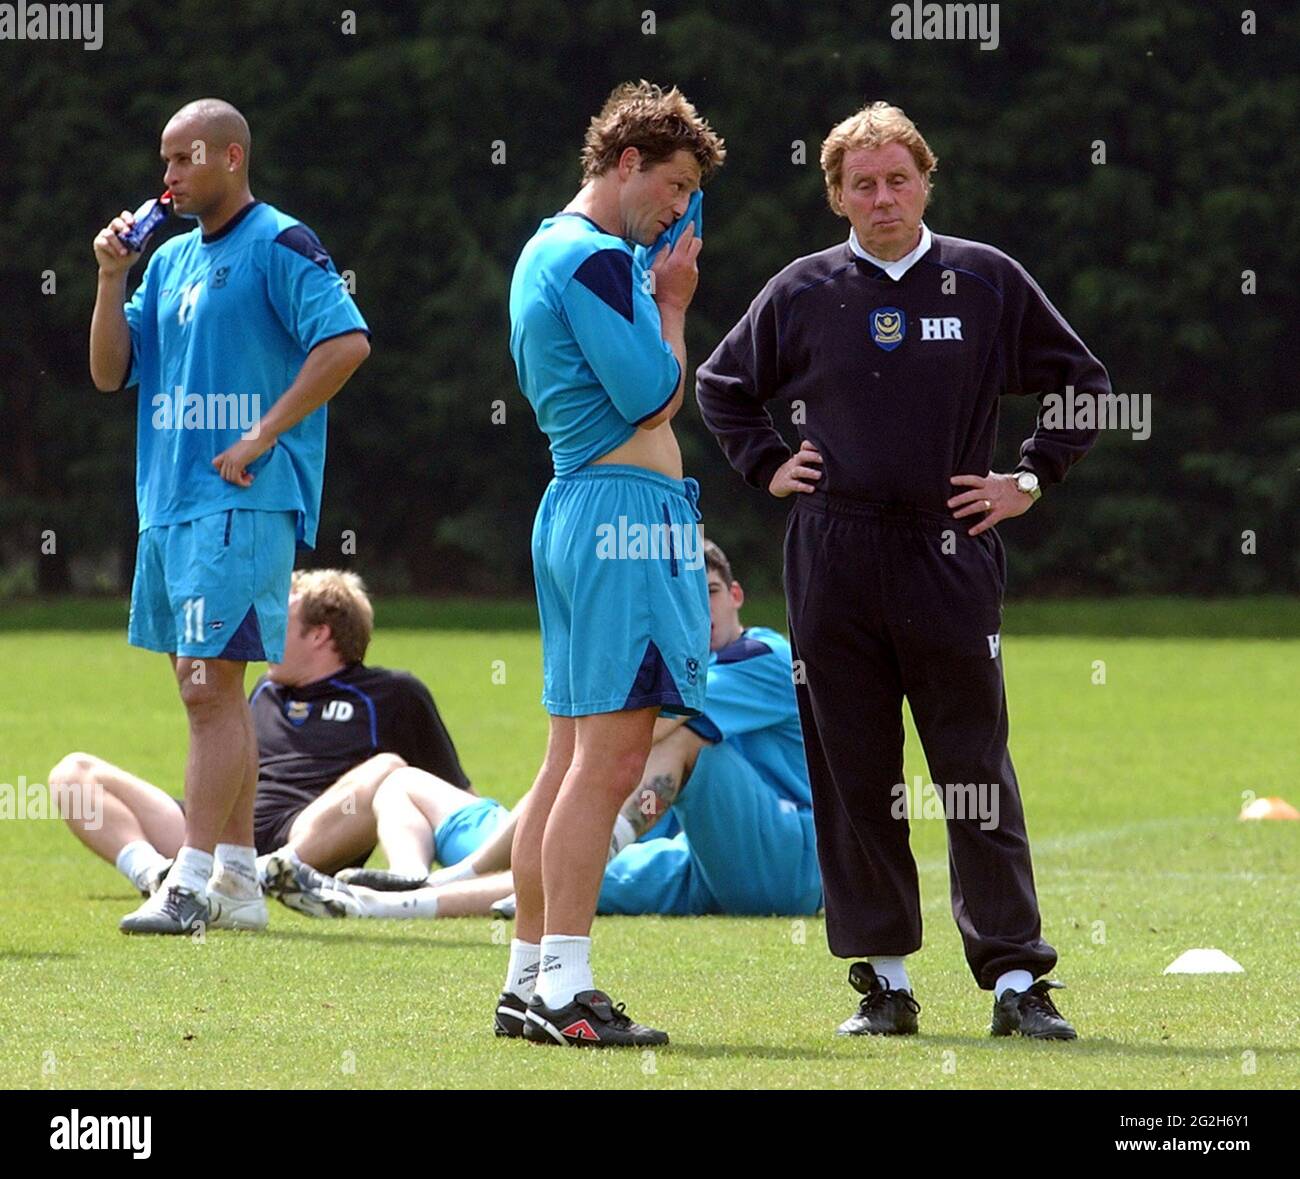 PORTSMOUTH TRAINING 13-5-04 JIM SMITH,HARRY REDKNAPP, AND ARJAN DE ZEEUW AT TRAINING. PIC MIKE WALKER, 2004 Stock Photo